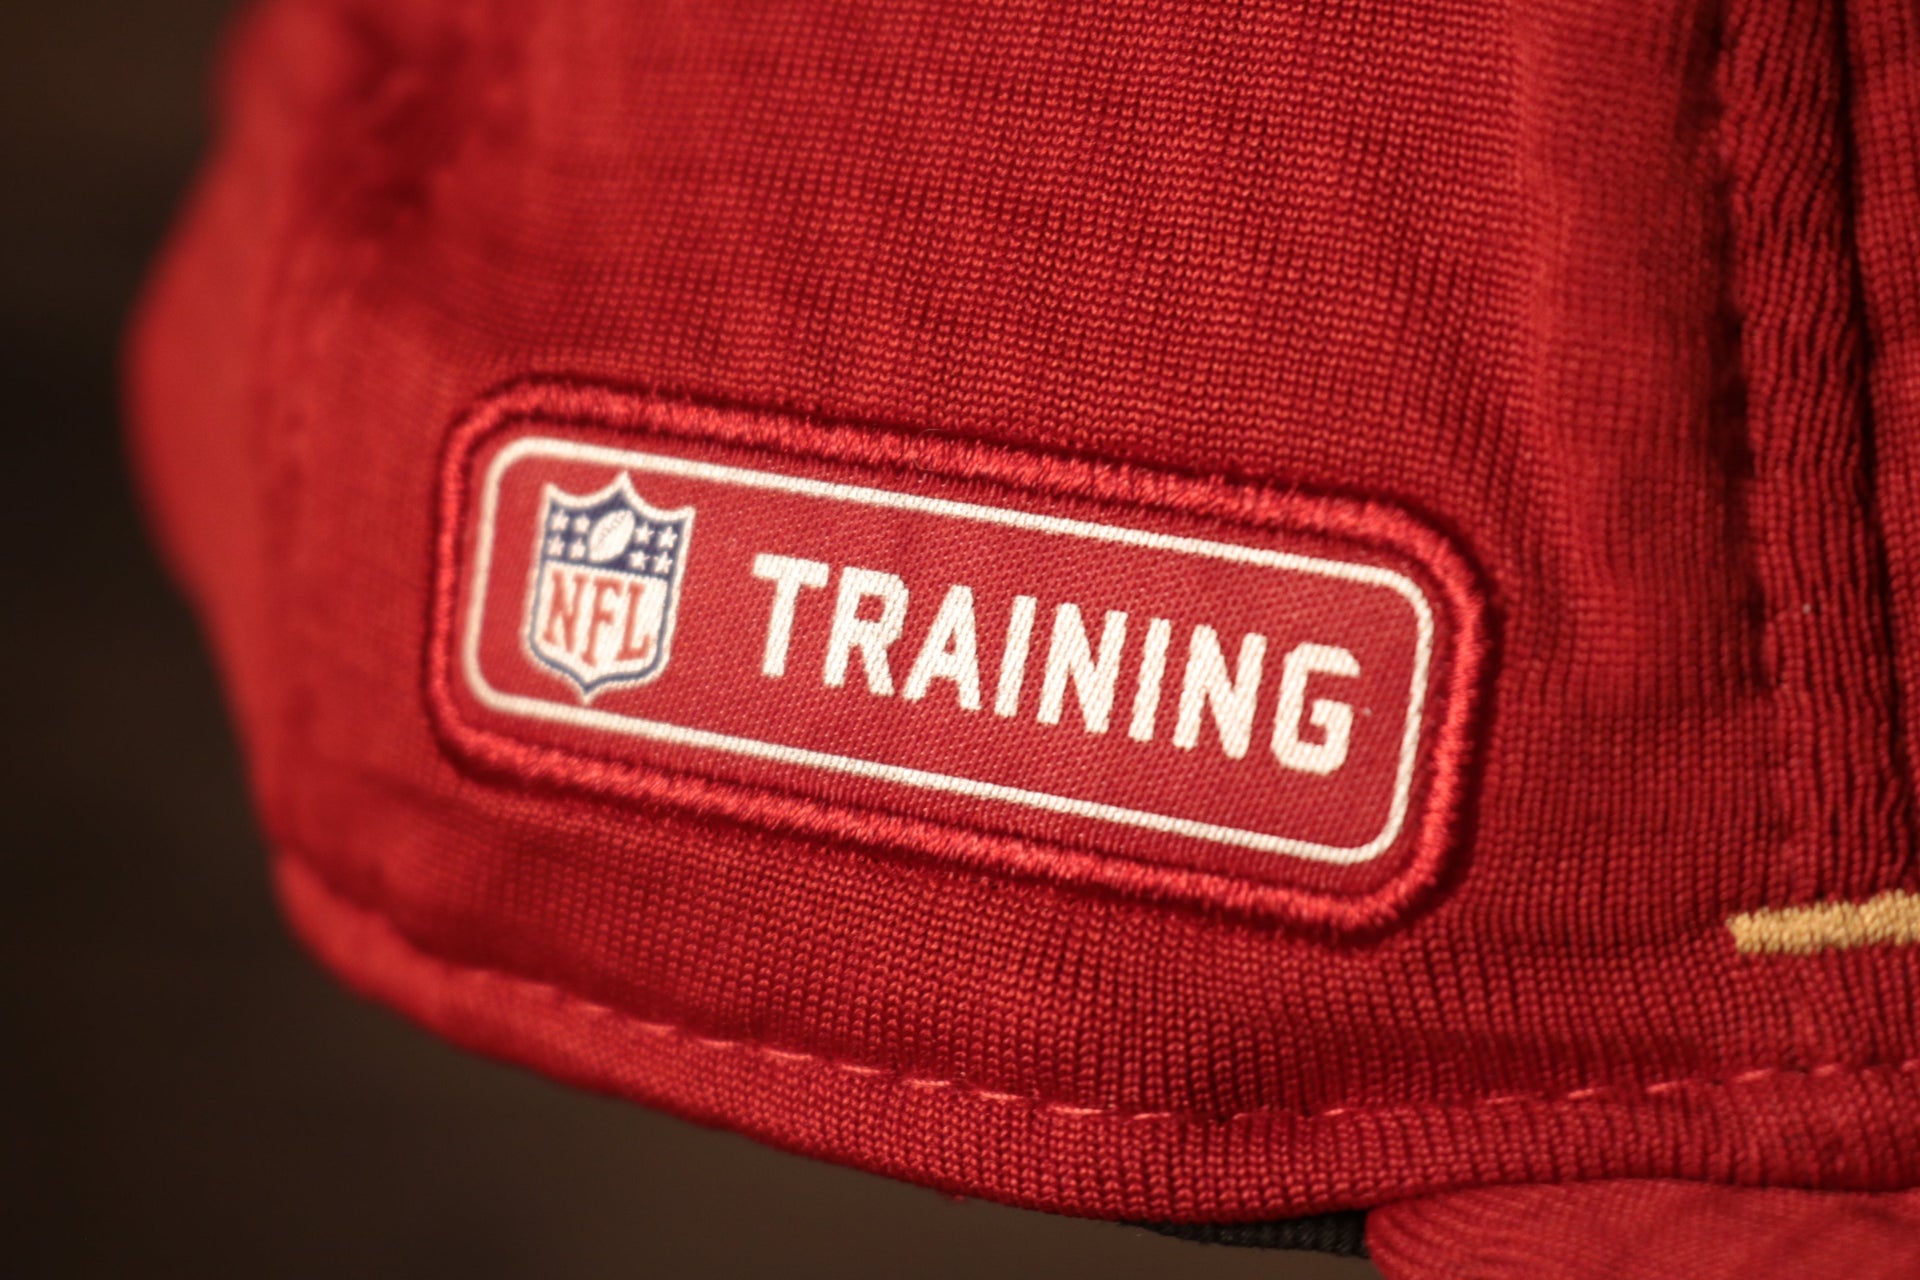 49ers 2020 Training Camp Snapback Hat | San Francisco 2020 On-Field Red Training Camp Snap Cap the training camp logo is red